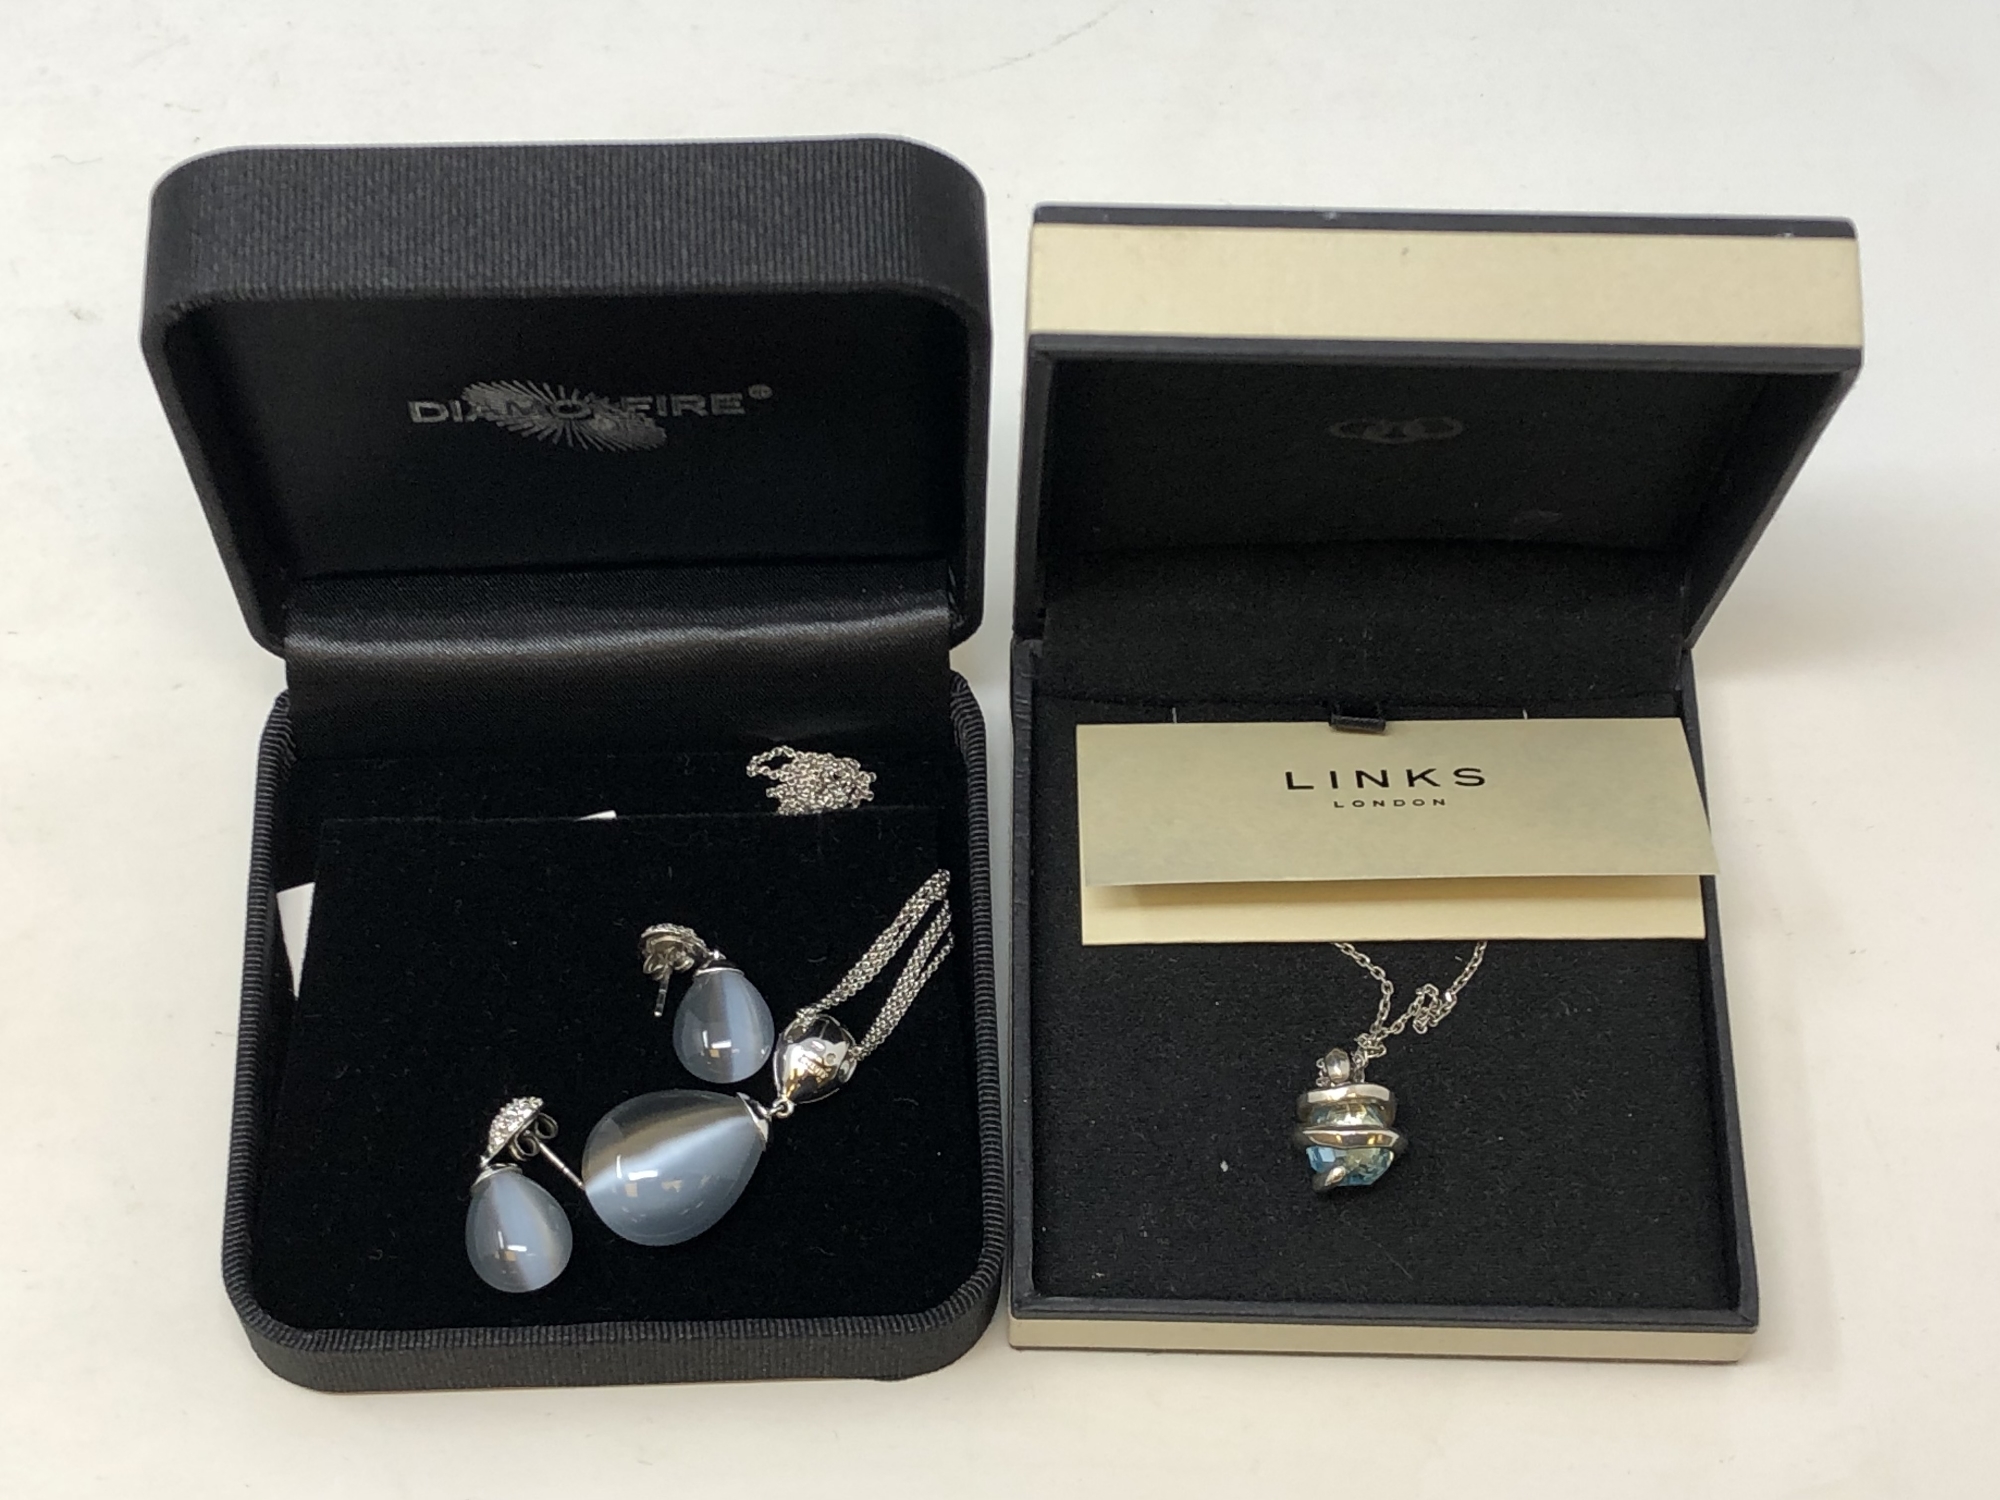 A Diamonfire silver pendant and matching earrings in box,